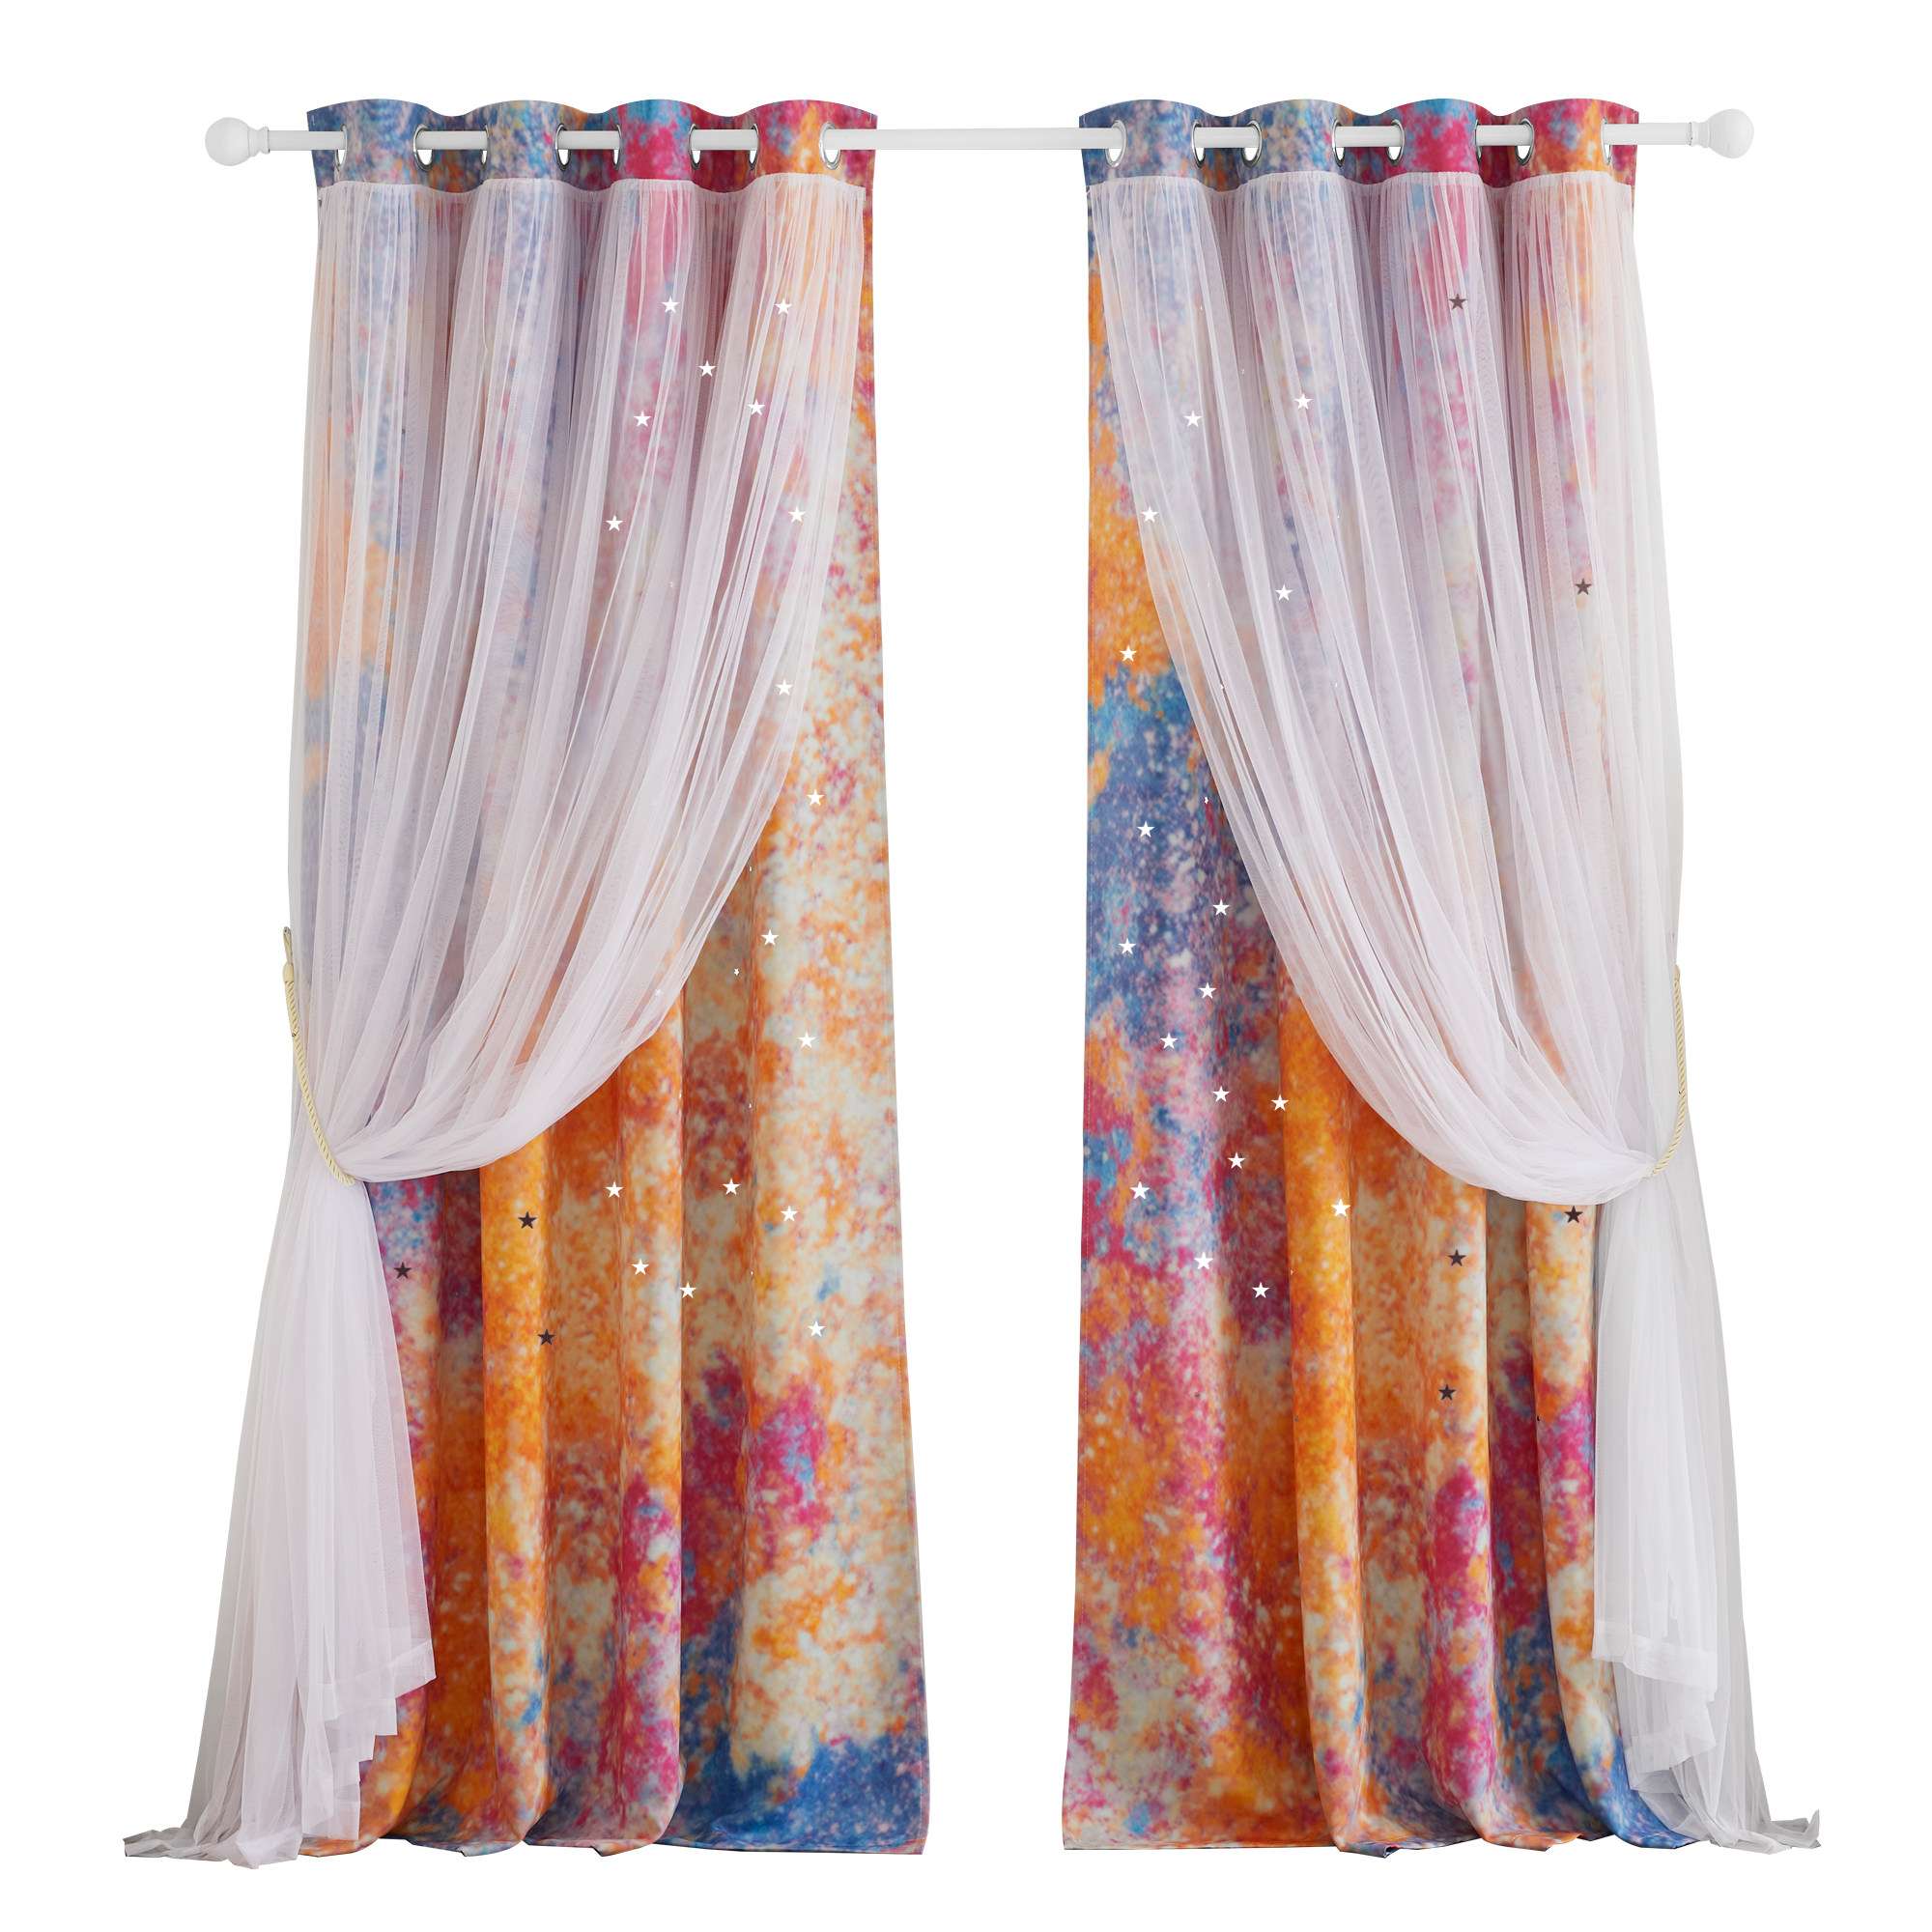 Outdoor Double Layer with Sheer Star Cut Out Blackout Curtains 1 Panel